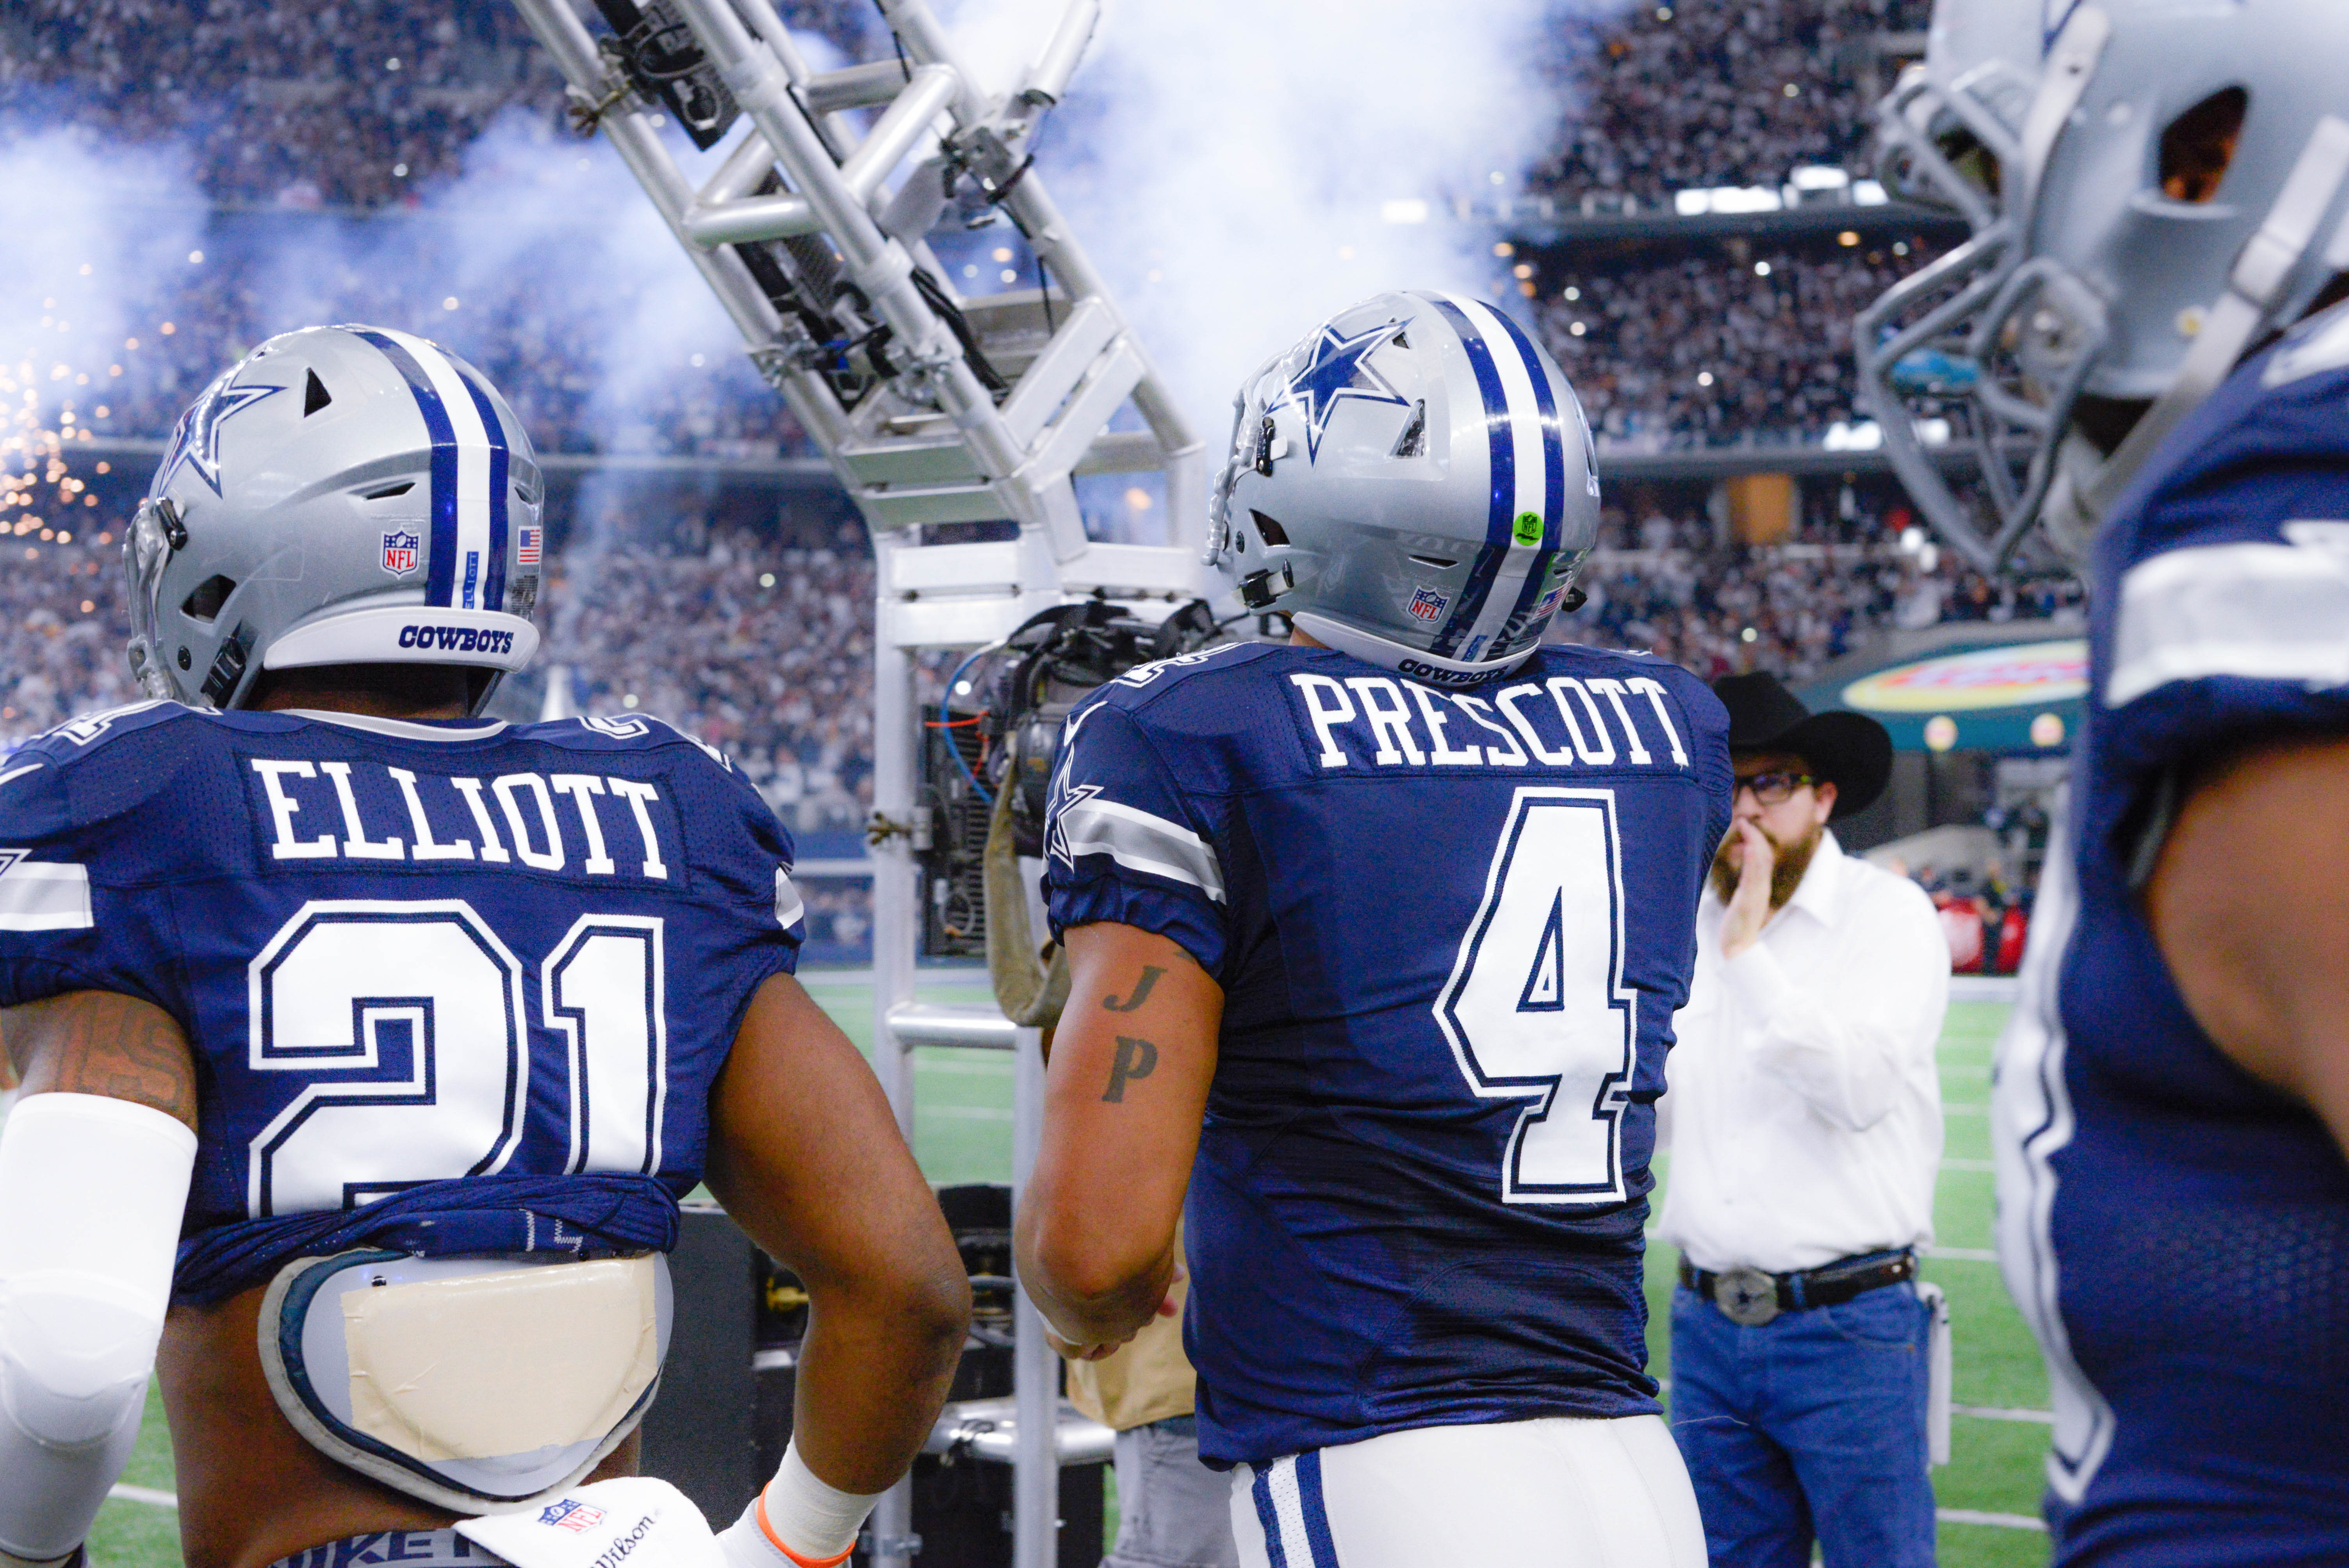 FIVE PLAYERS DALLAS COWBOYS NAMED TO THE PRO BOWL D210SPORTS